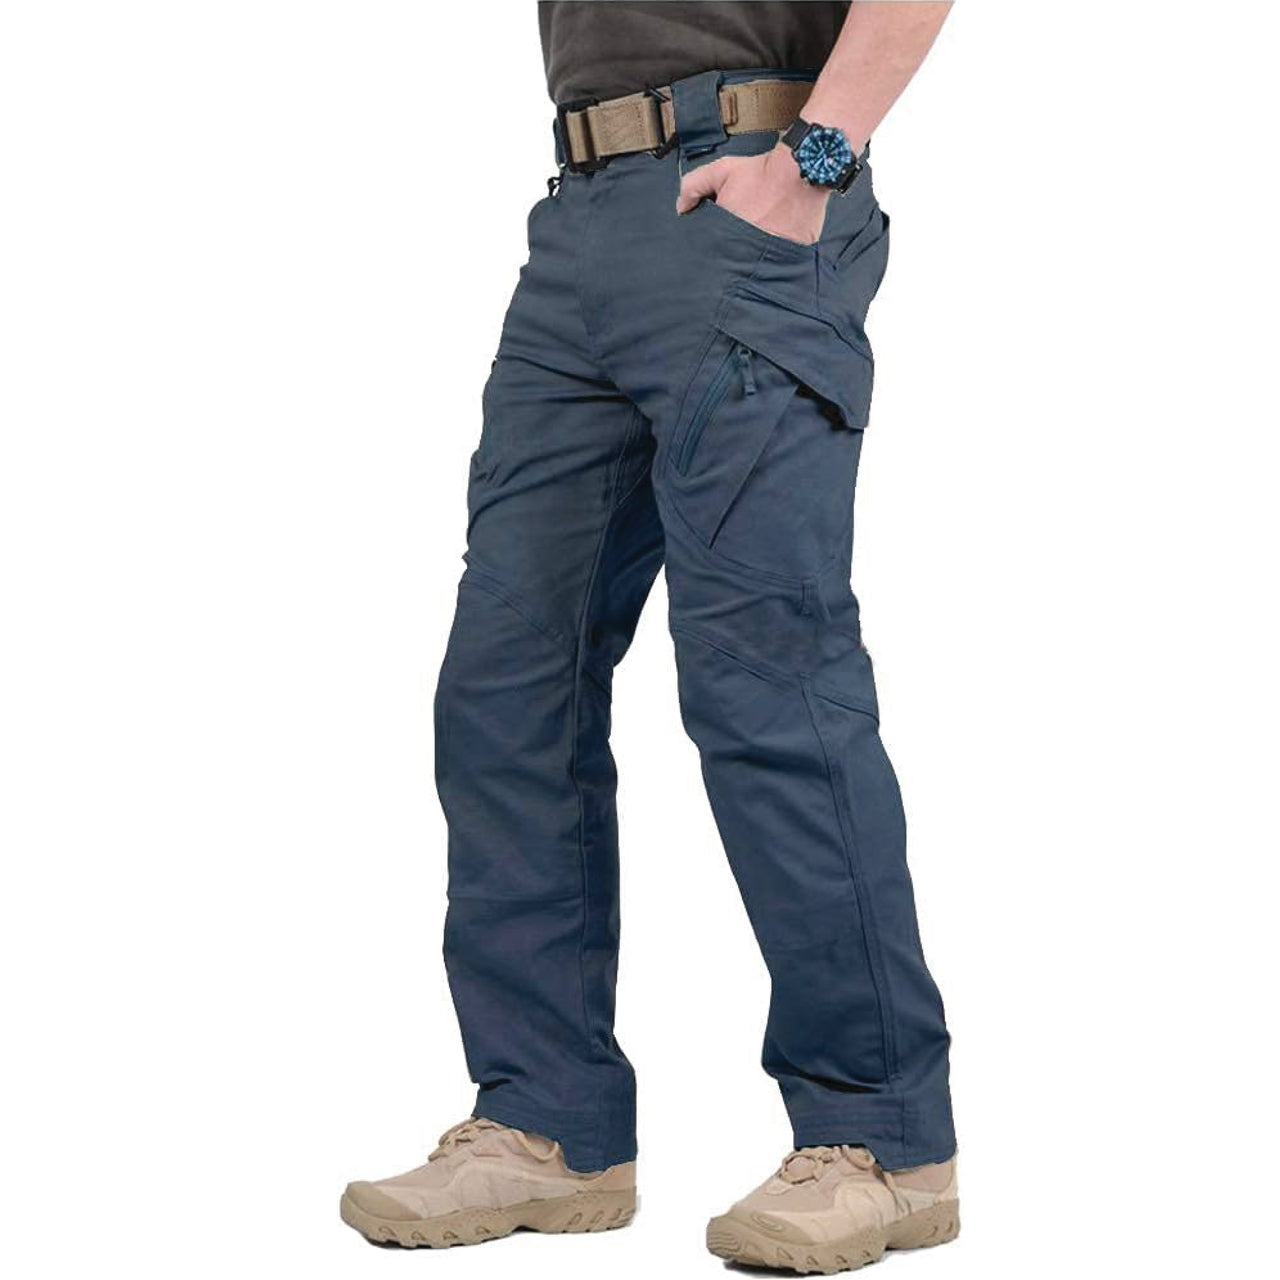 6 RUNNIG COLORS WOMEN CARGO PANTS at Rs 899/piece in Pune | ID: 23661251555